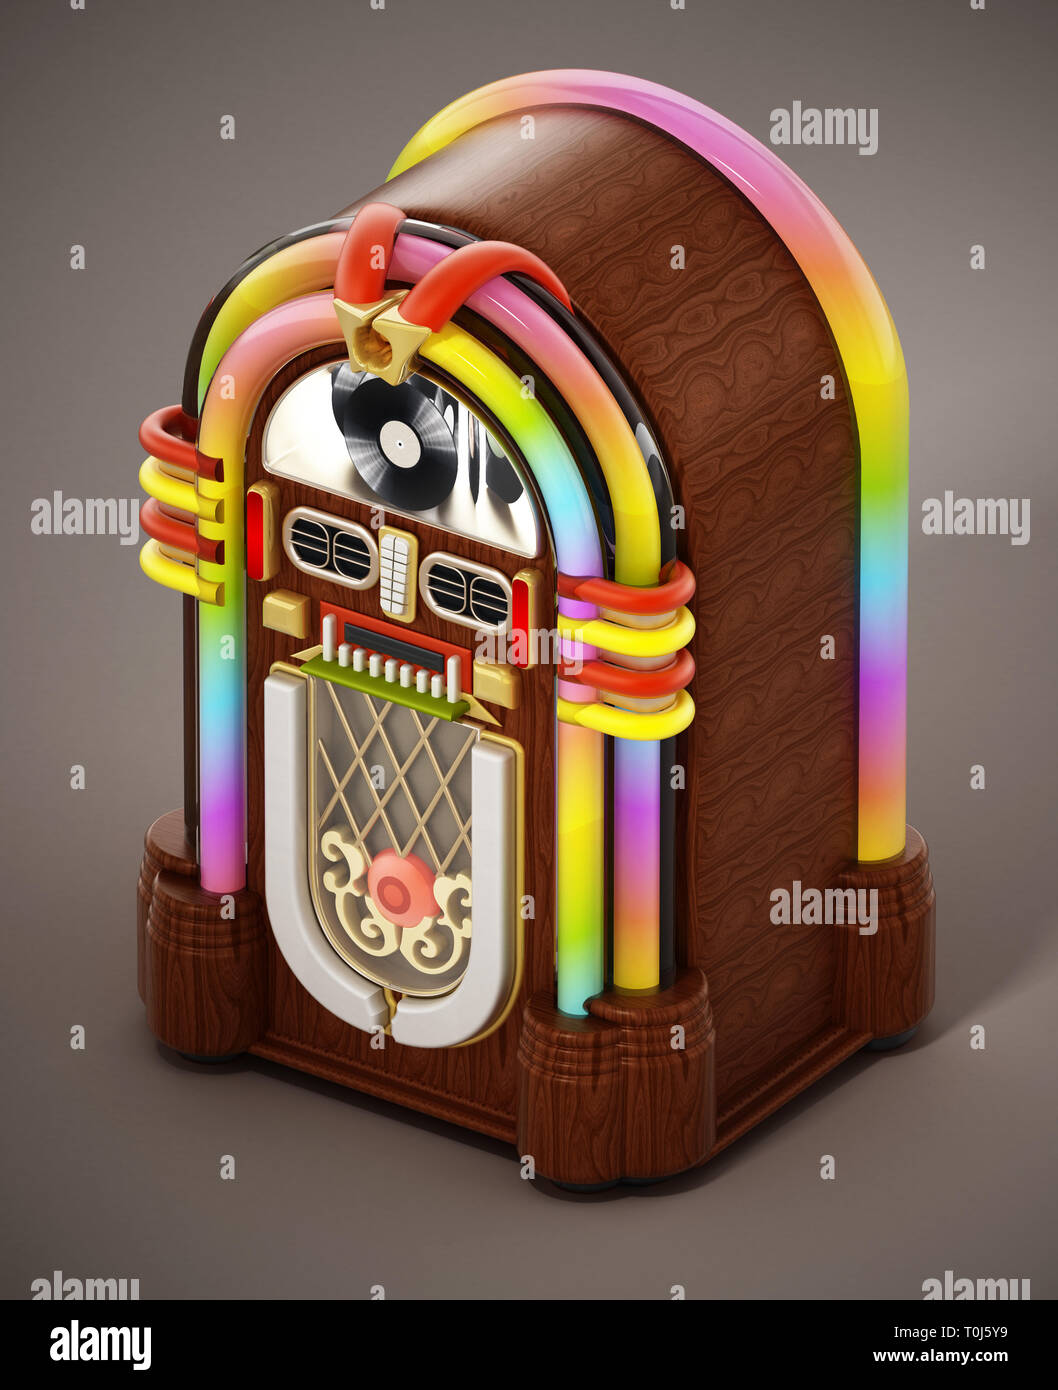 Jukebox standing on brown background. 3D illustration. Stock Photo